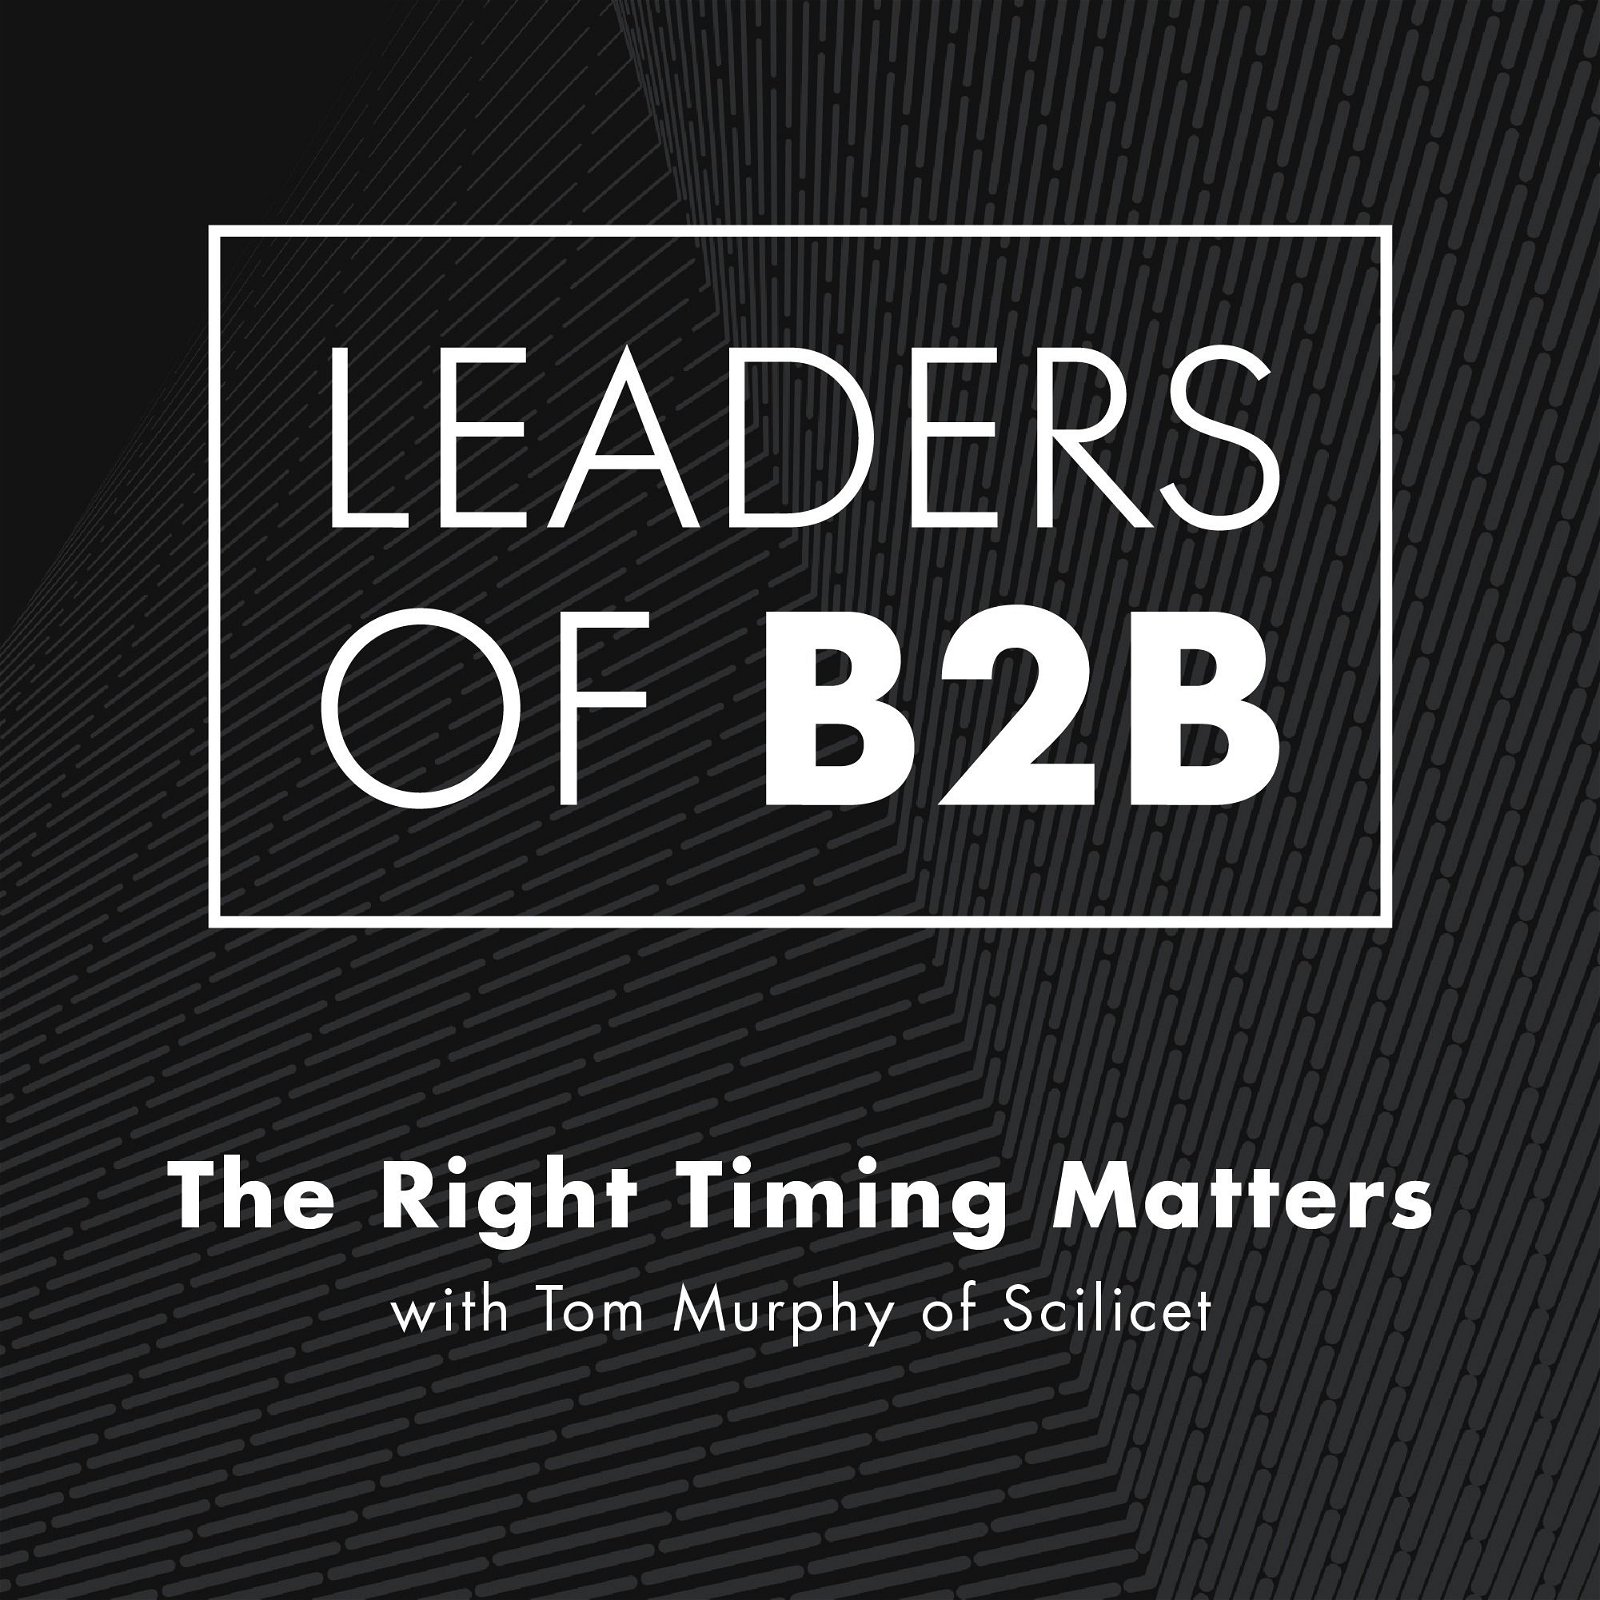 The Right Timing Matters with Tom Murphy of Scilicet